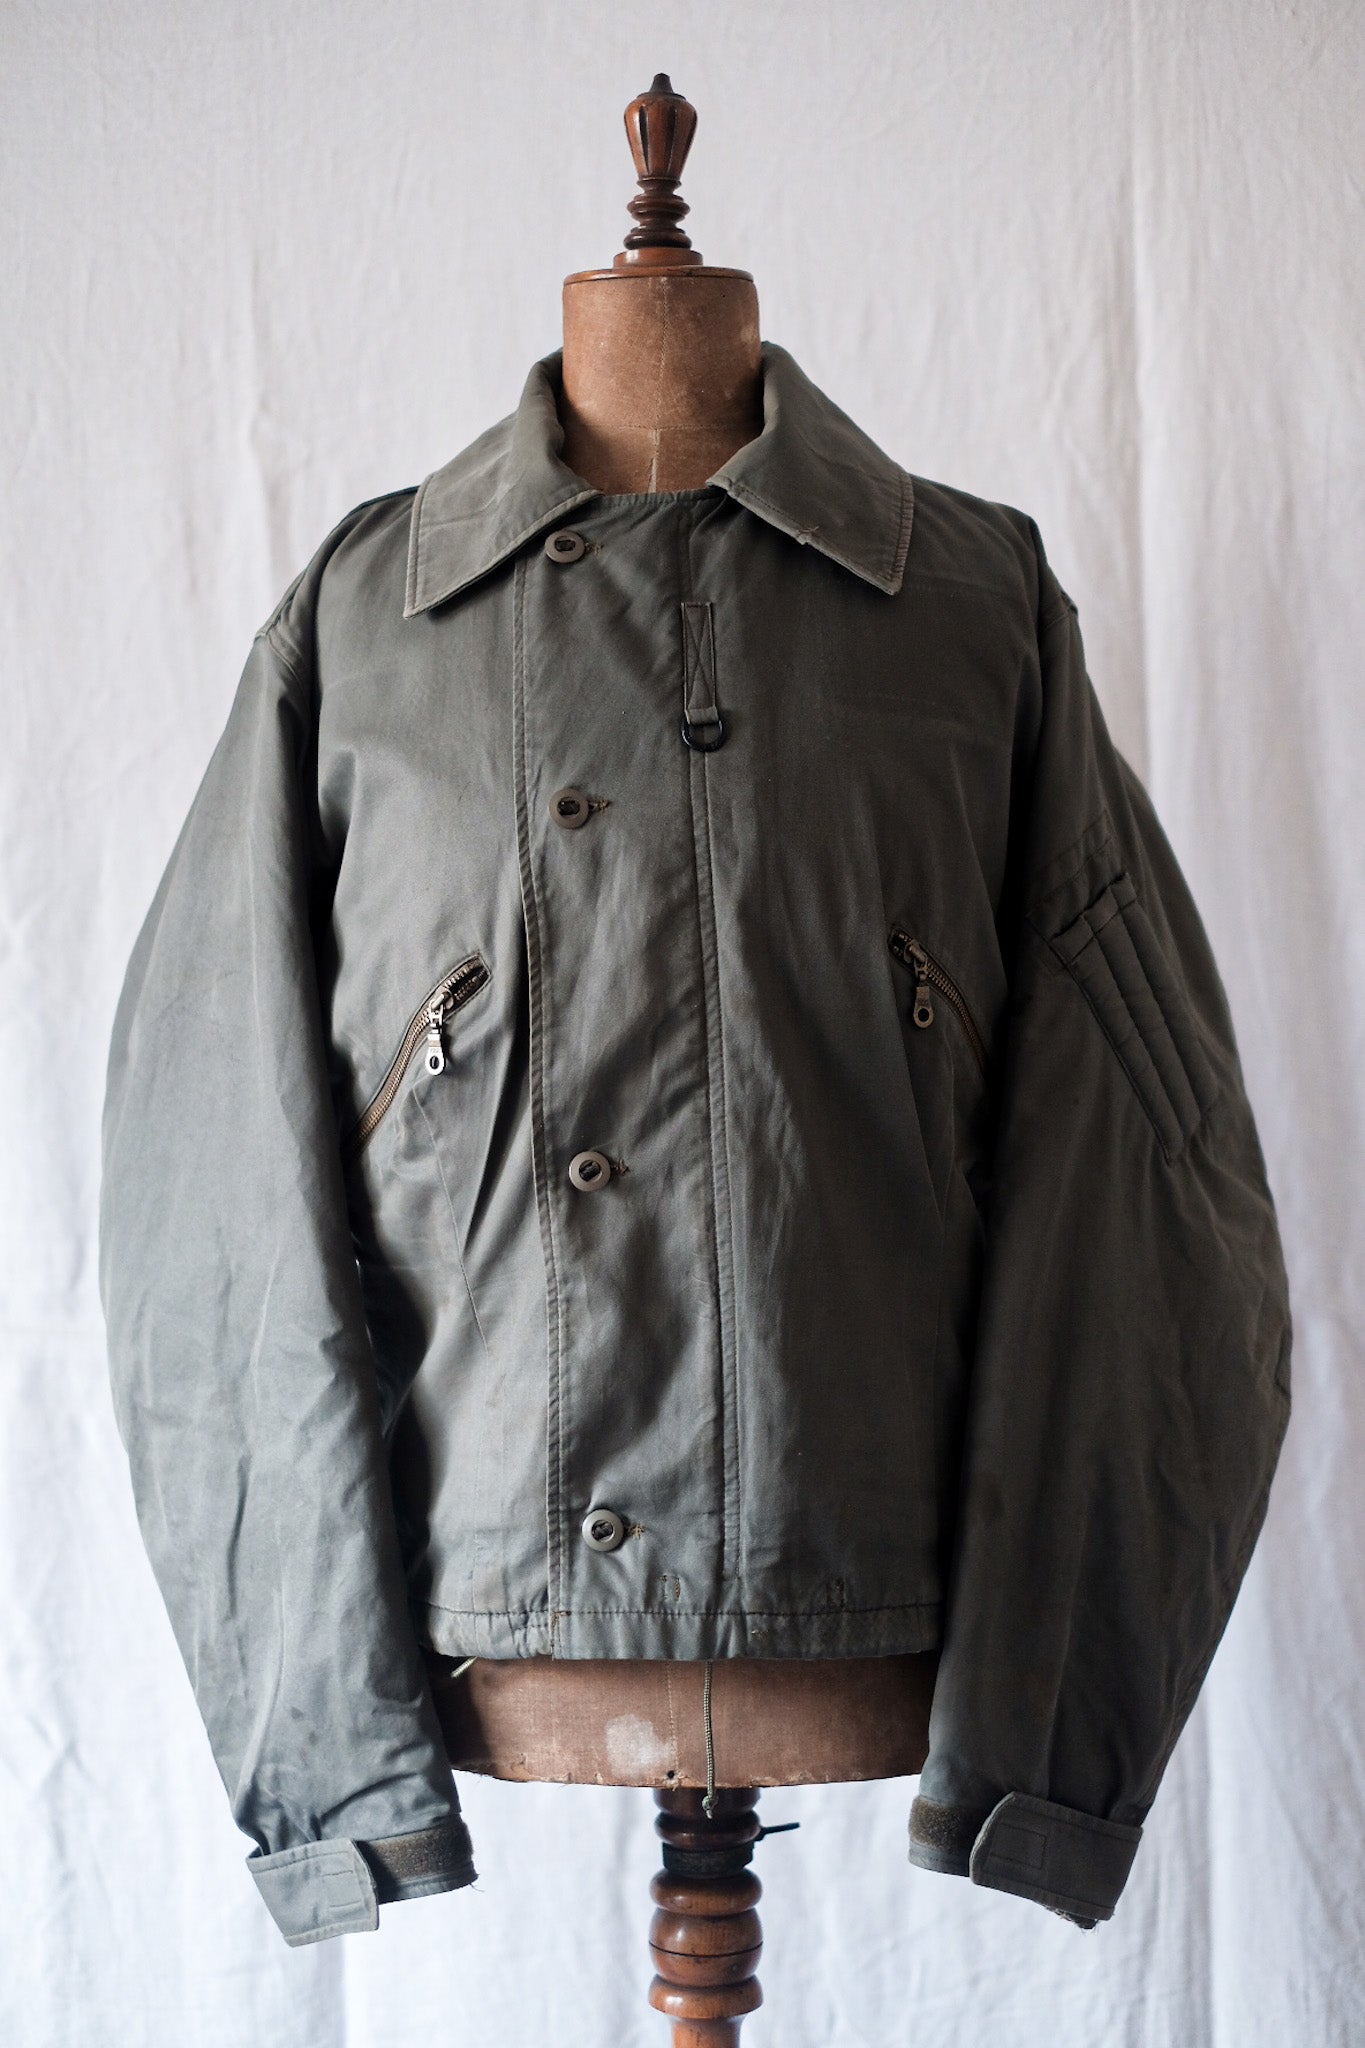 00's] ROYAL AIR FORCE MK3 COLD WEATHER FLYING JACKET SIZE.7